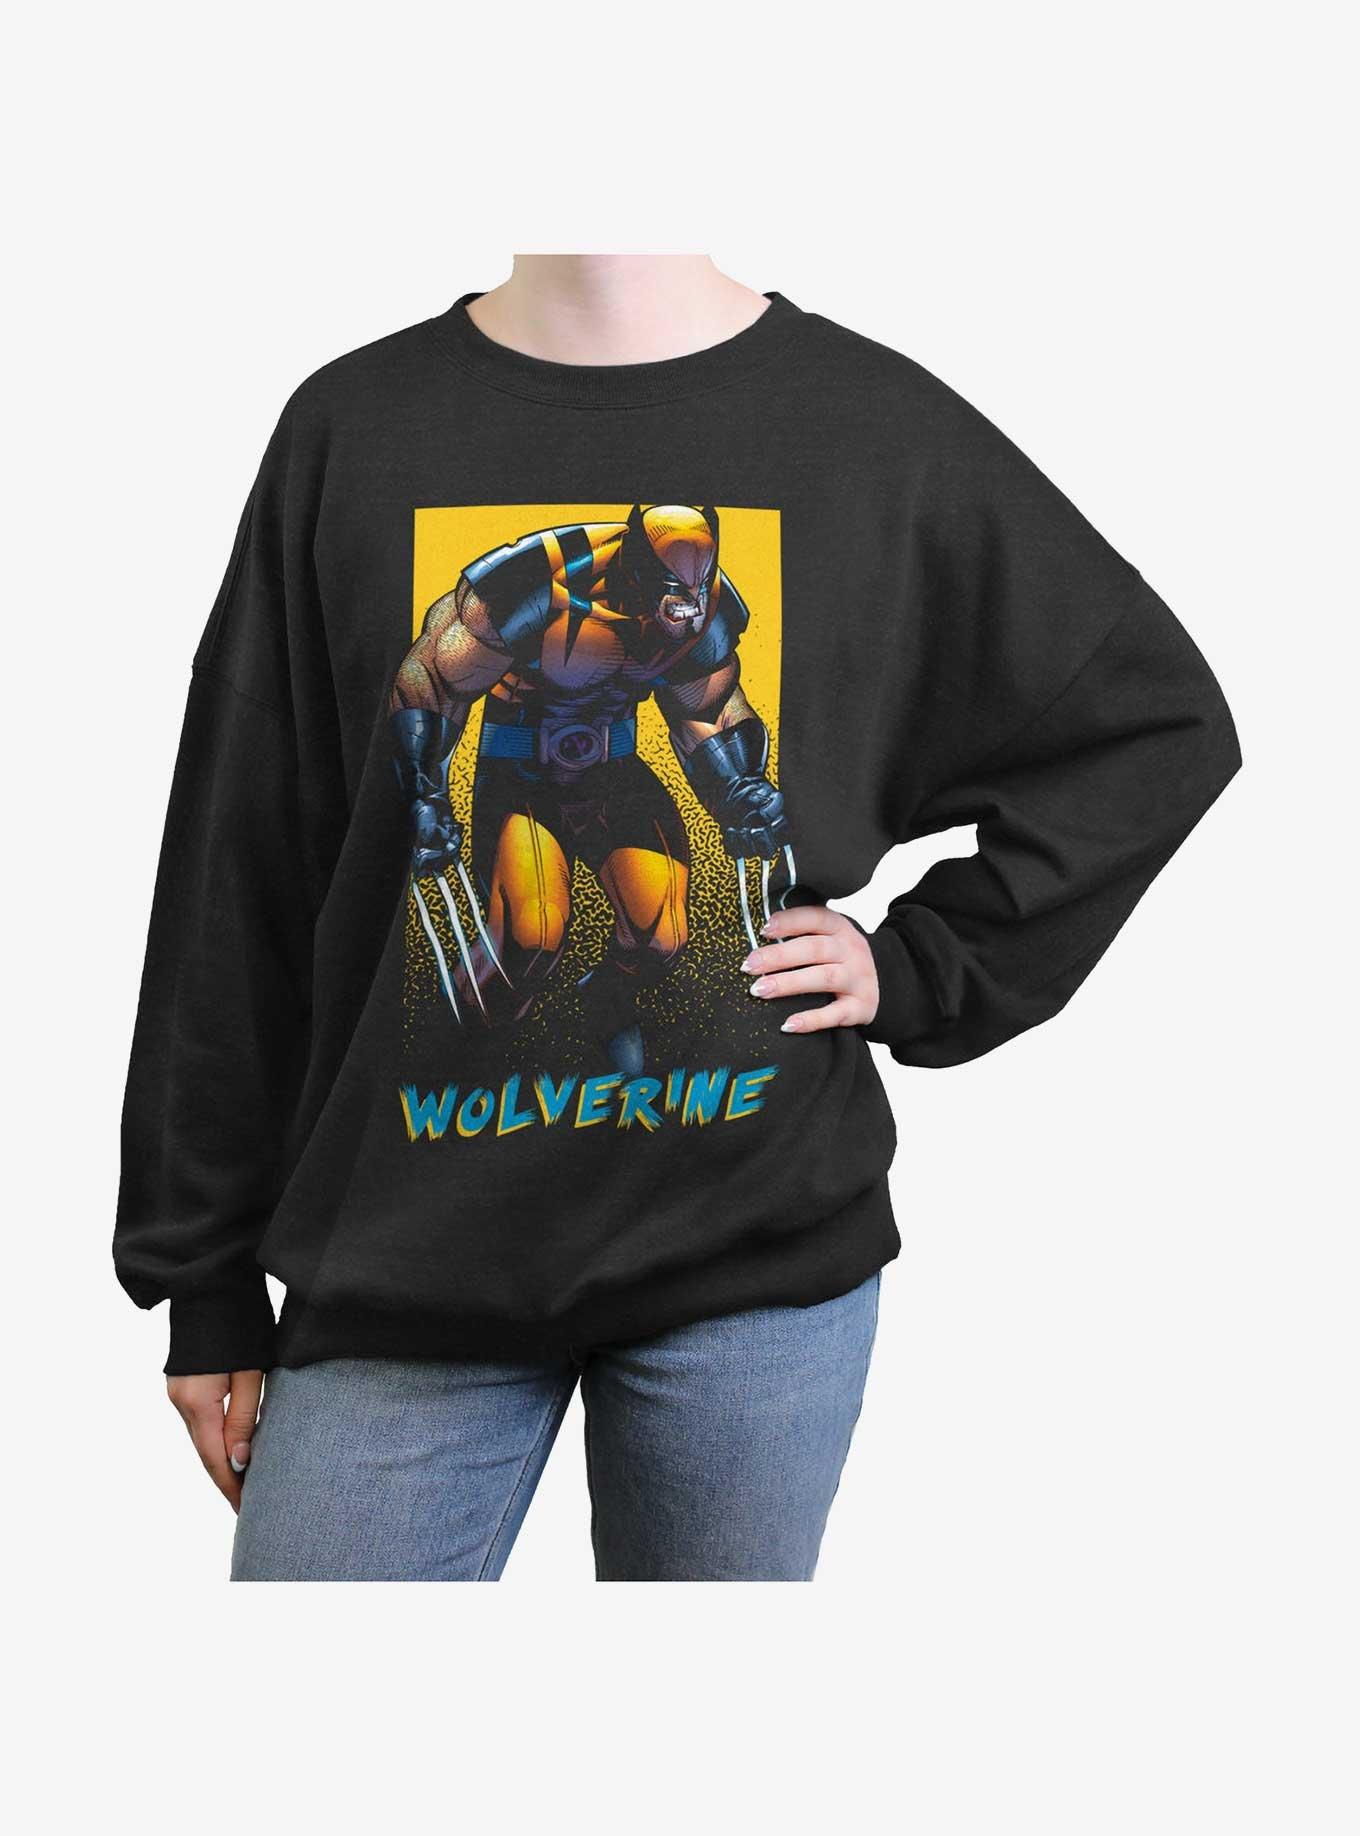 Wolverine Claws Out Poster Womens Oversized Sweatshirt, BLACK, hi-res